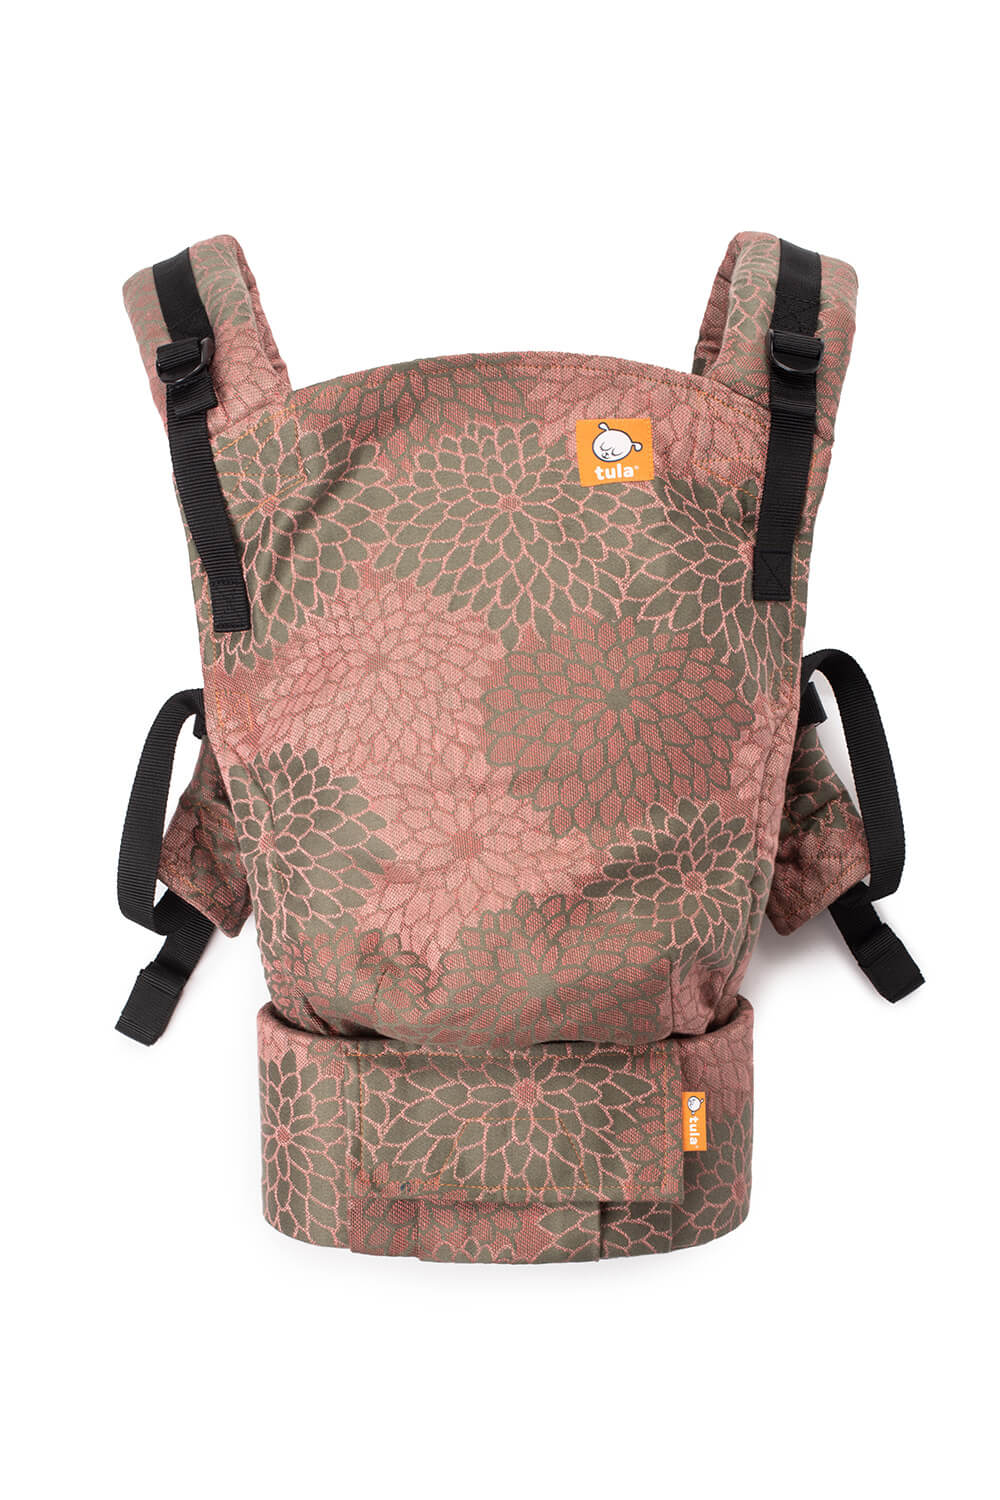 Kiku Chelsey - Signature Woven Free-To-Grow Carrier